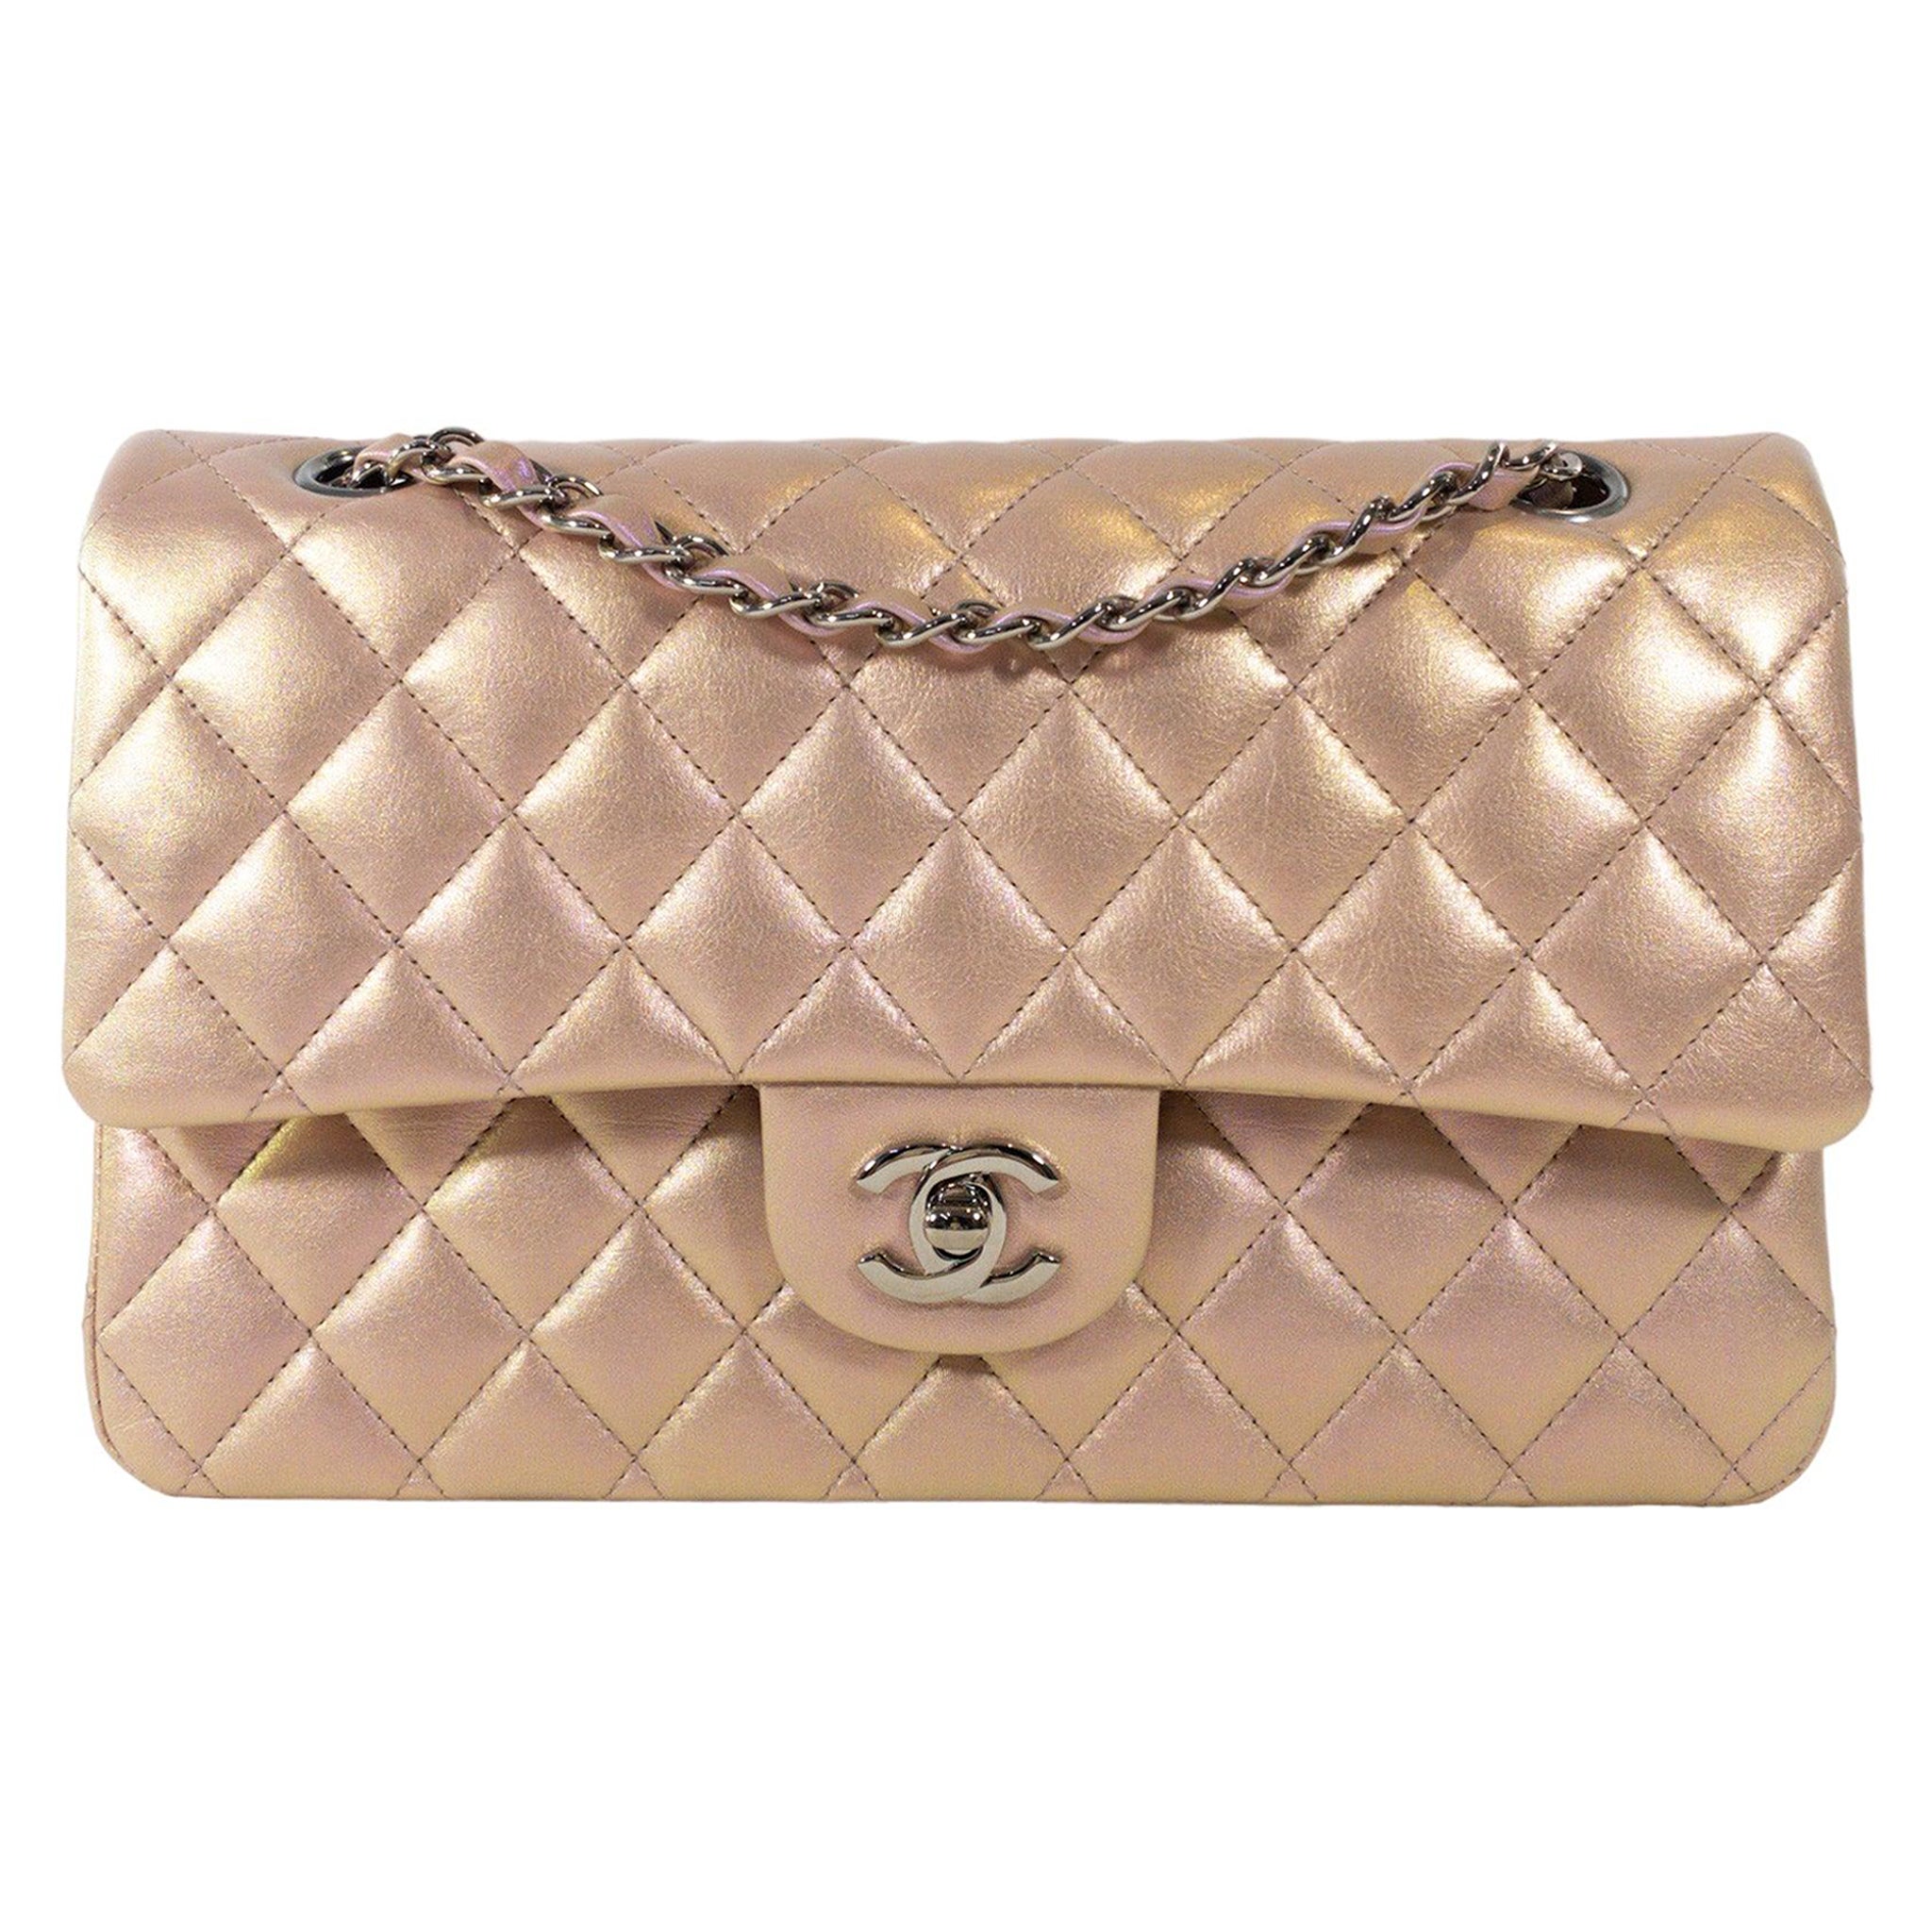 Chanel Iridescent Pink - 22 For Sale on 1stDibs  chanel 19s iridescent pink,  chanel 19s pink, chanel pink iridescent